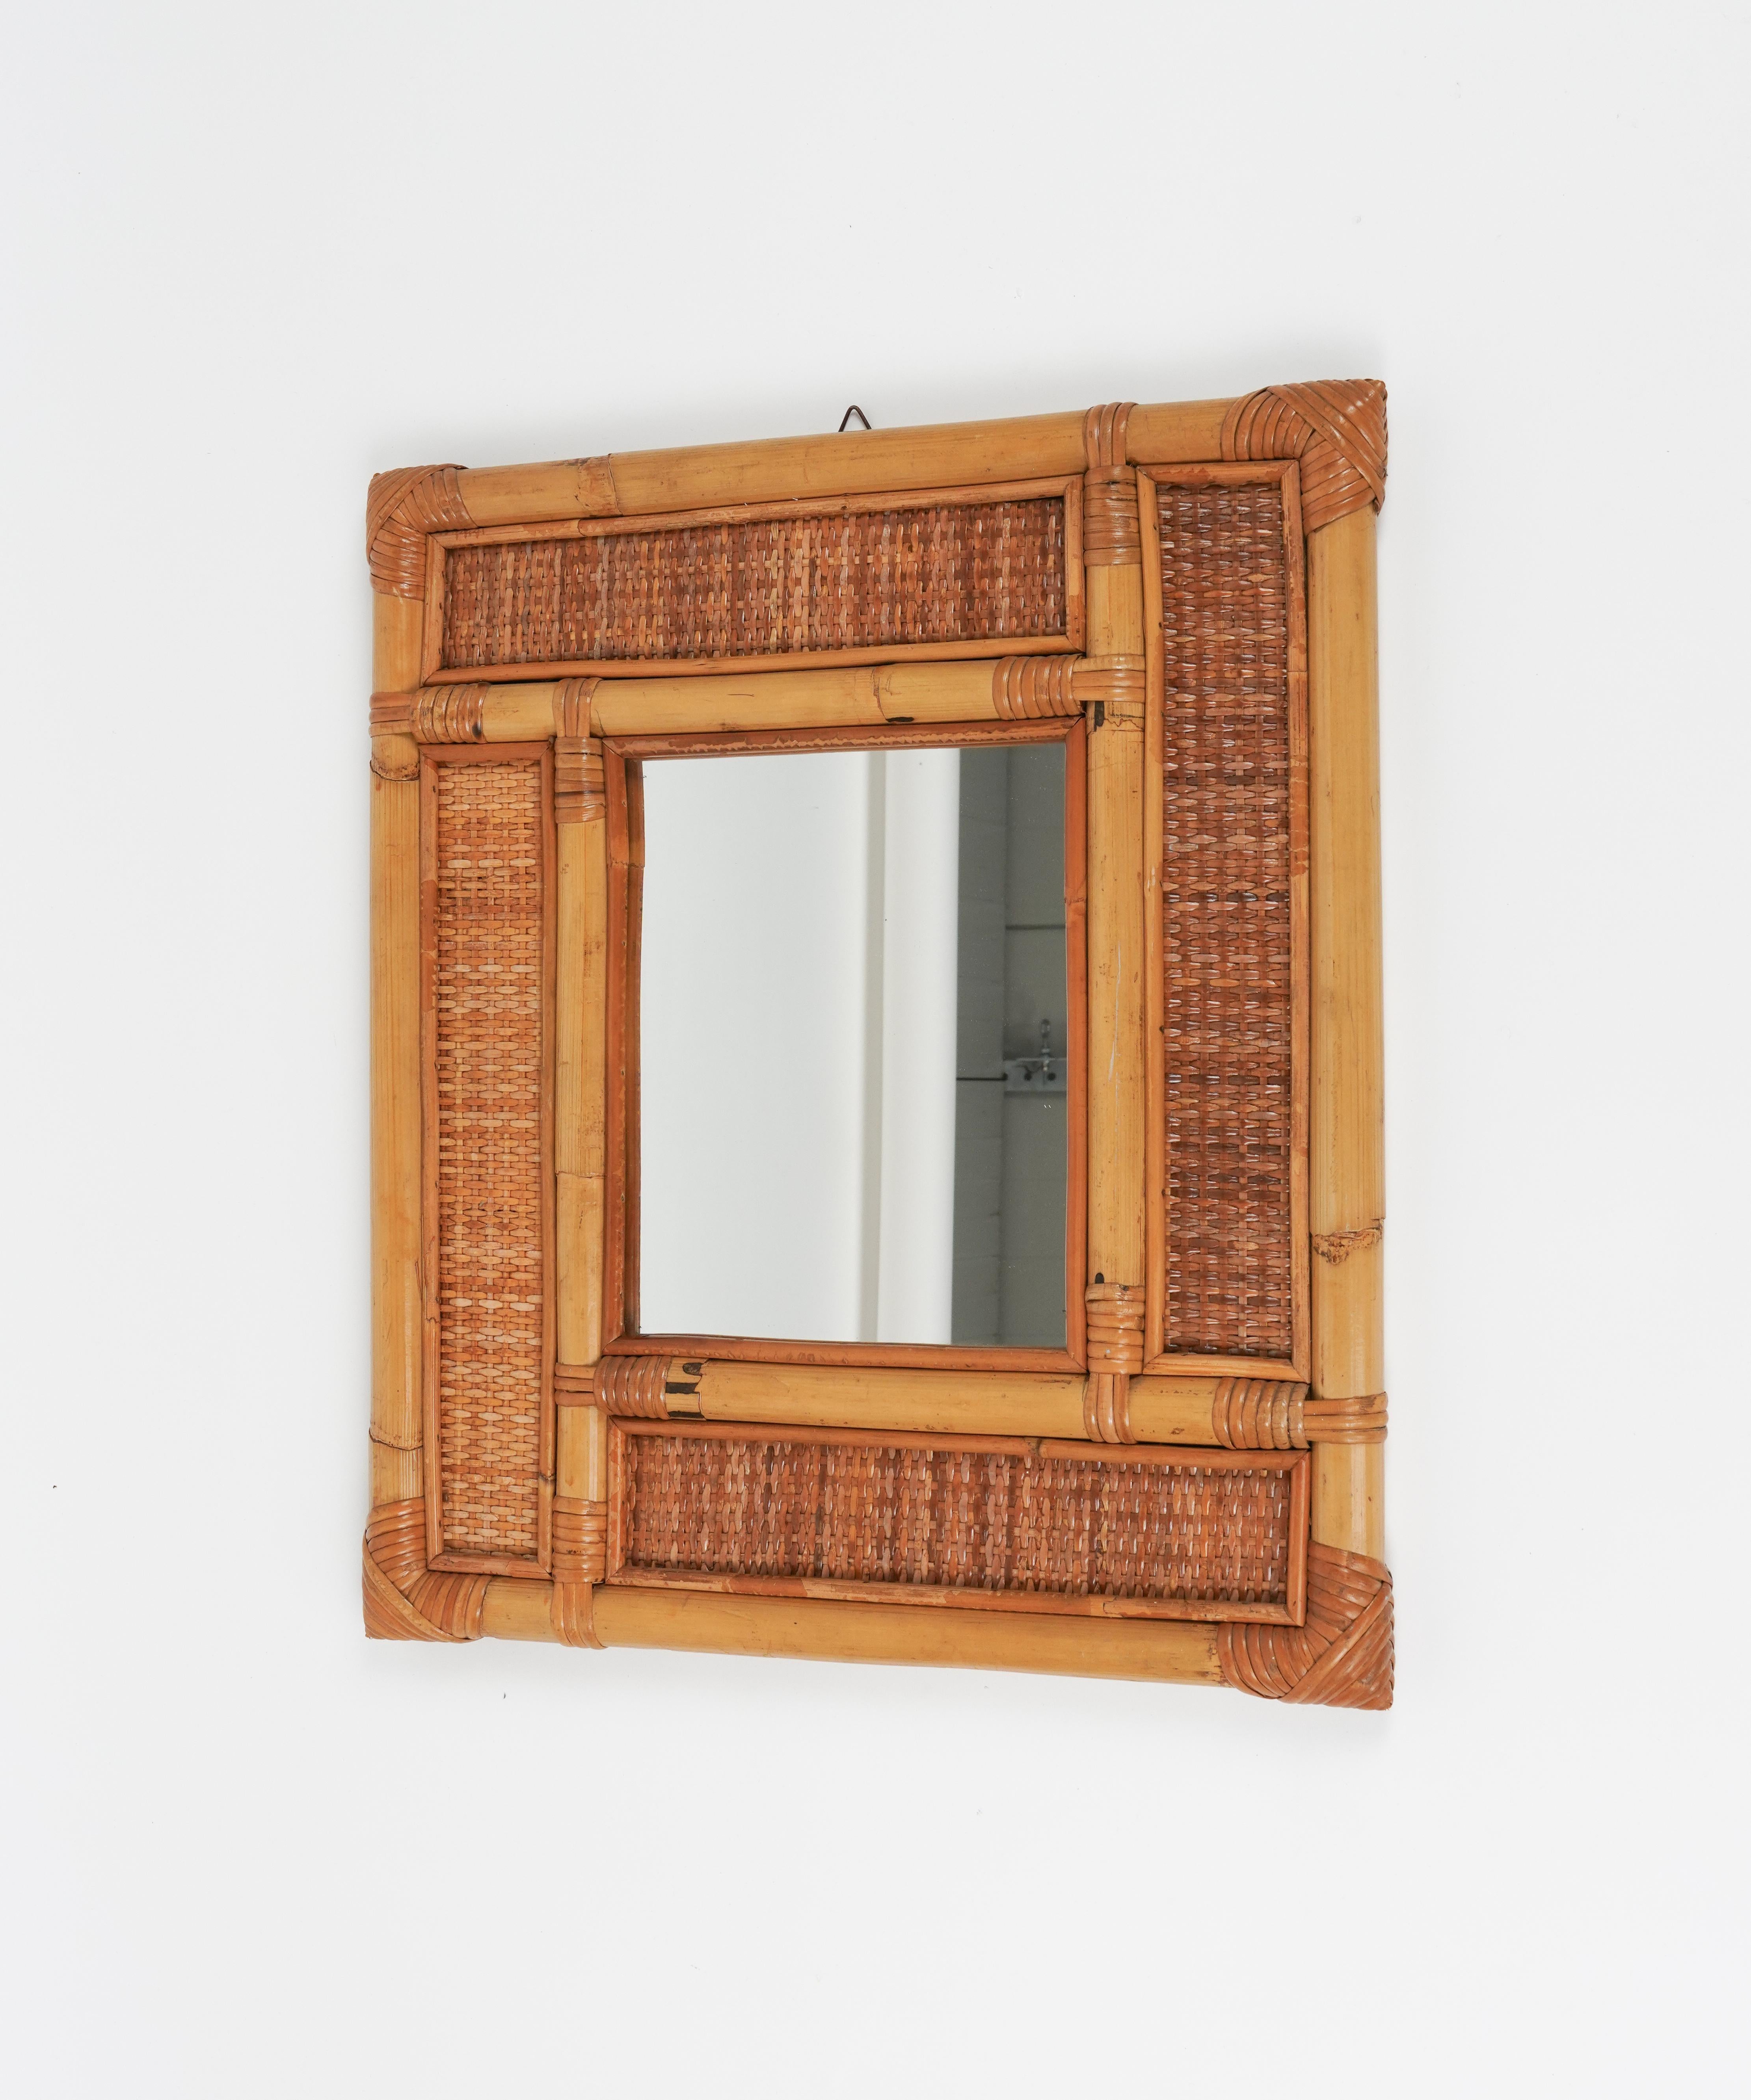 Midcentury Bamboo and Rattan Wall Mirror Vivai Del Sud Style, Italy 1970s For Sale 1